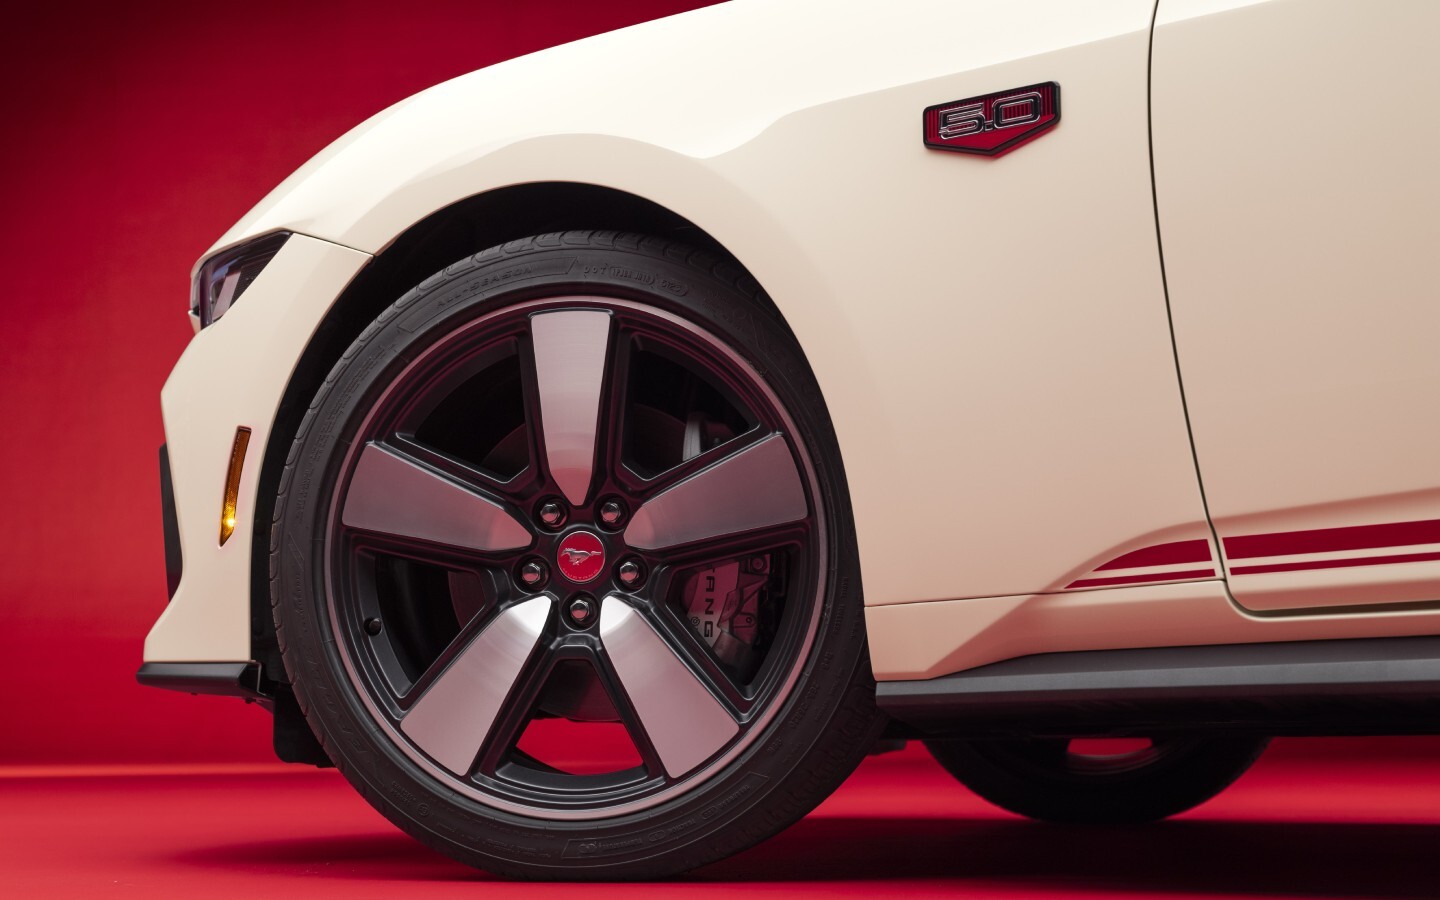 the 60th anniversary special edition has distinct wheels